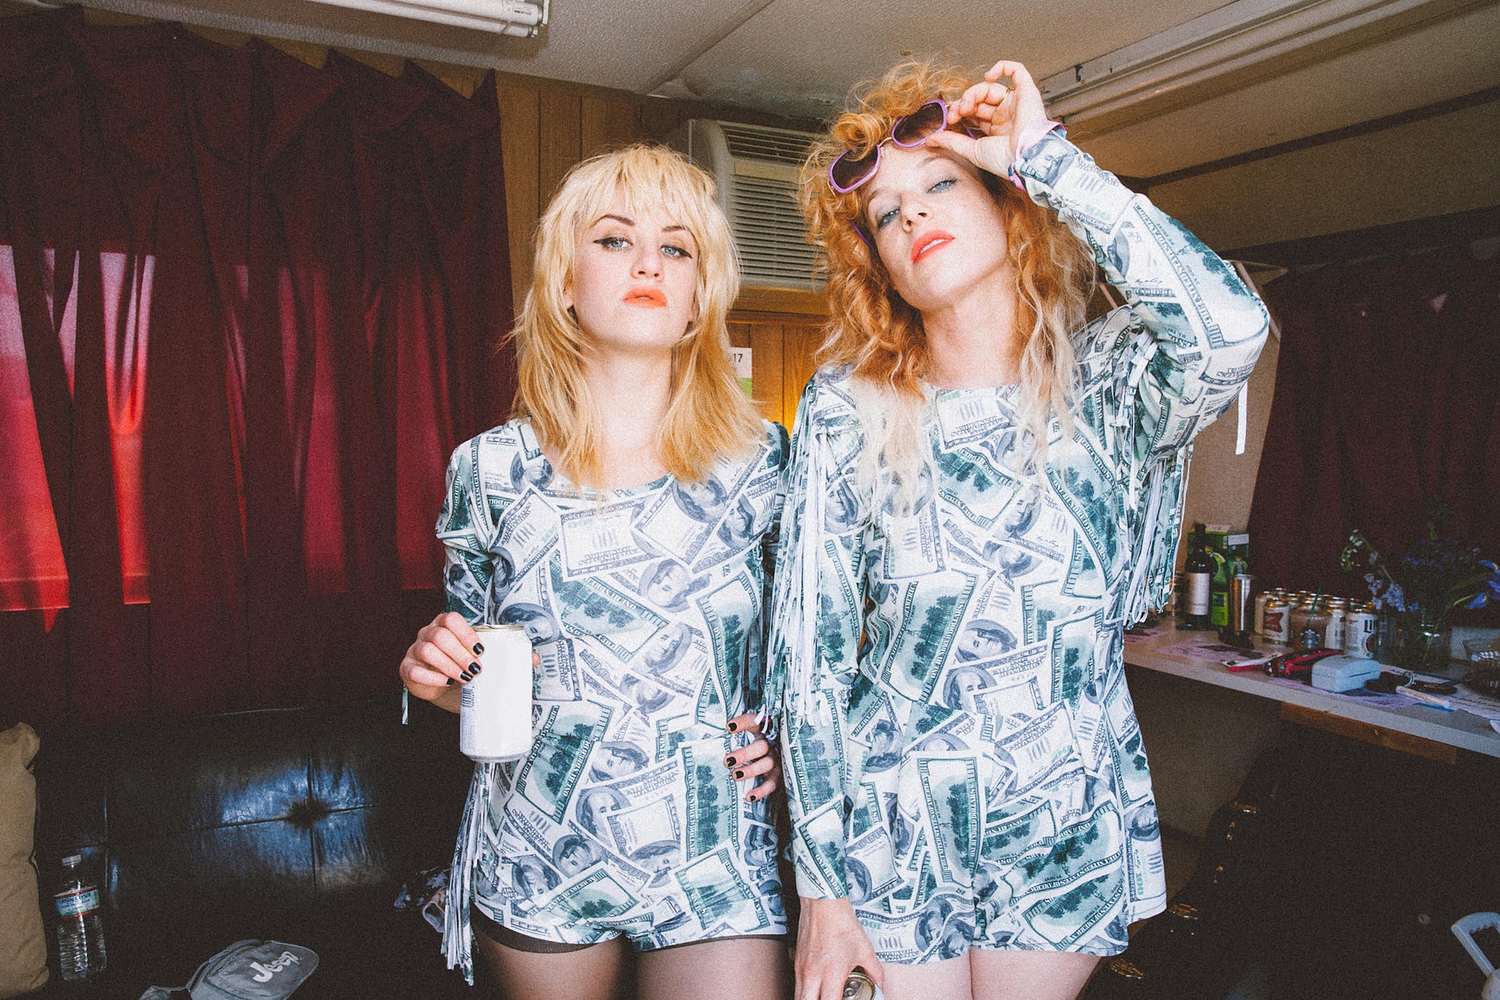 “It’s gonna be a rowdy show” - Deap Vally prep for their Fluffer Pit Party